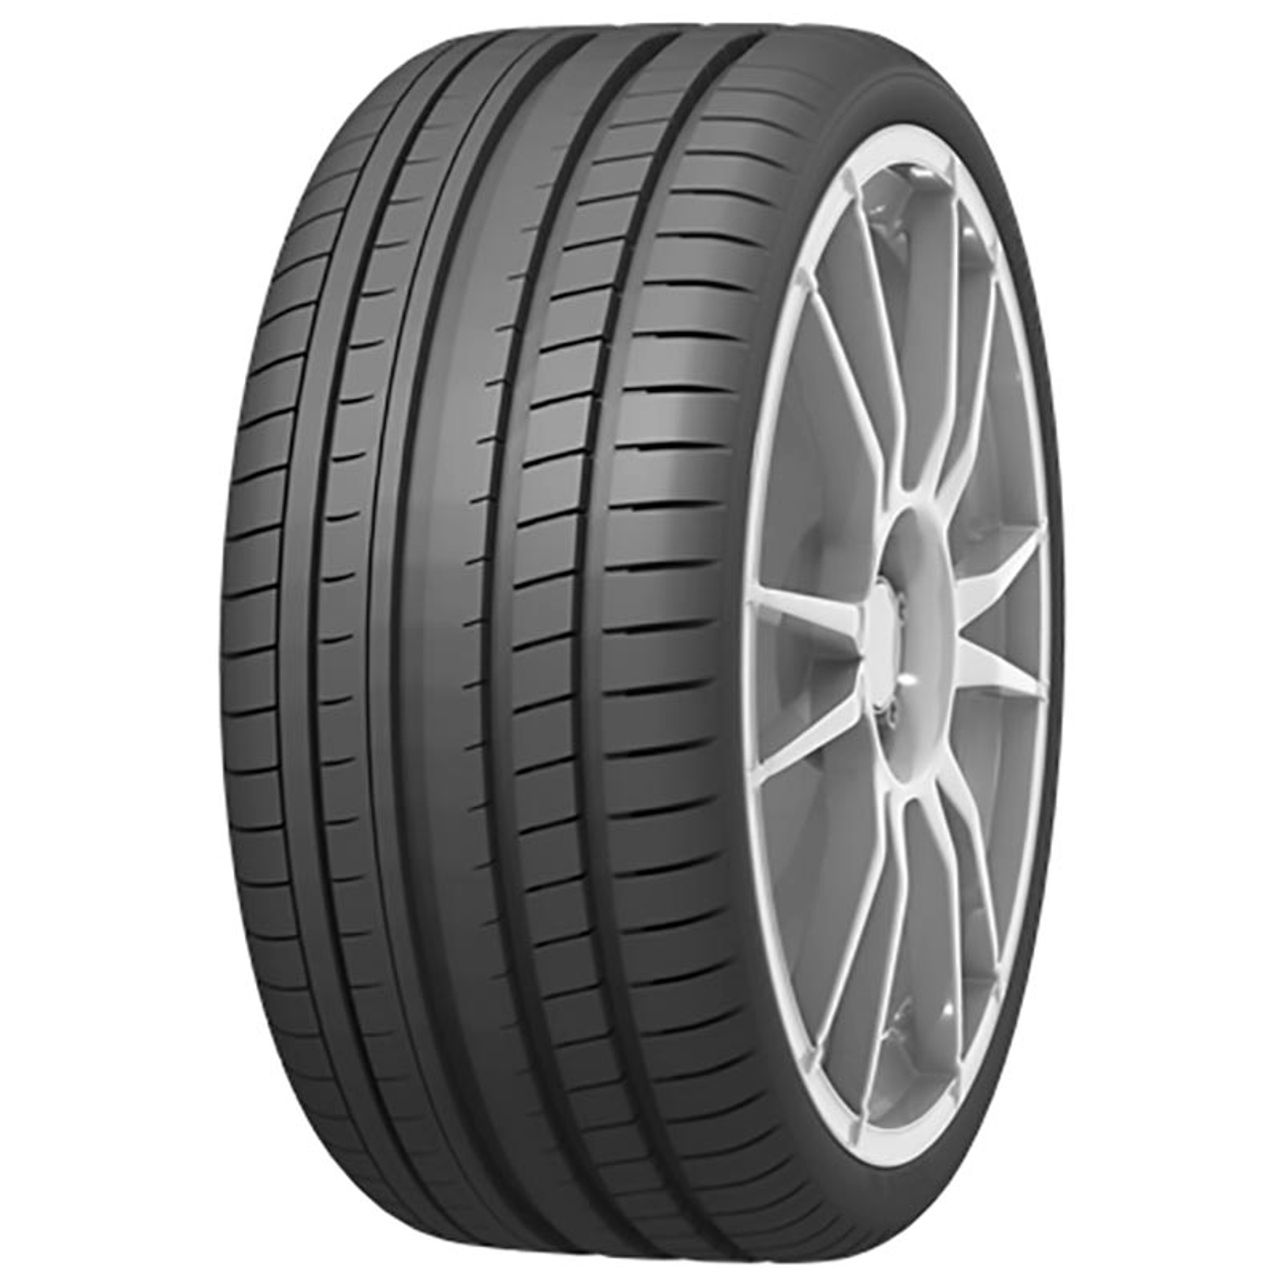 INFINITY ECOMAX 225/55R17 101Y BSW